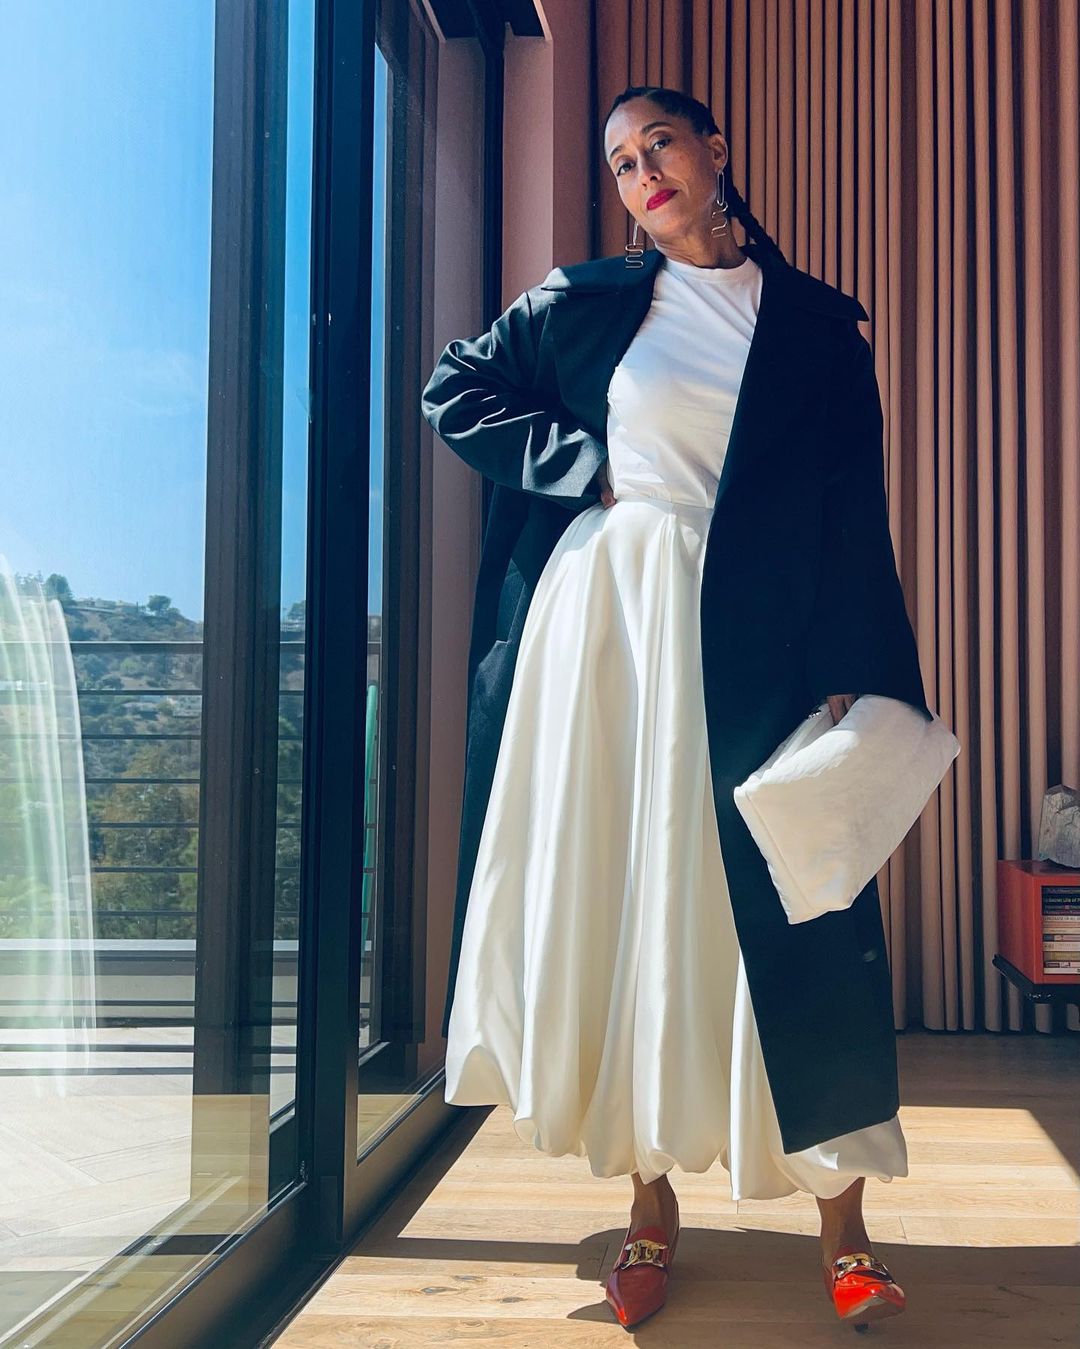 Tracee Ellis Ross wears a white dress, trench coat and red heels.